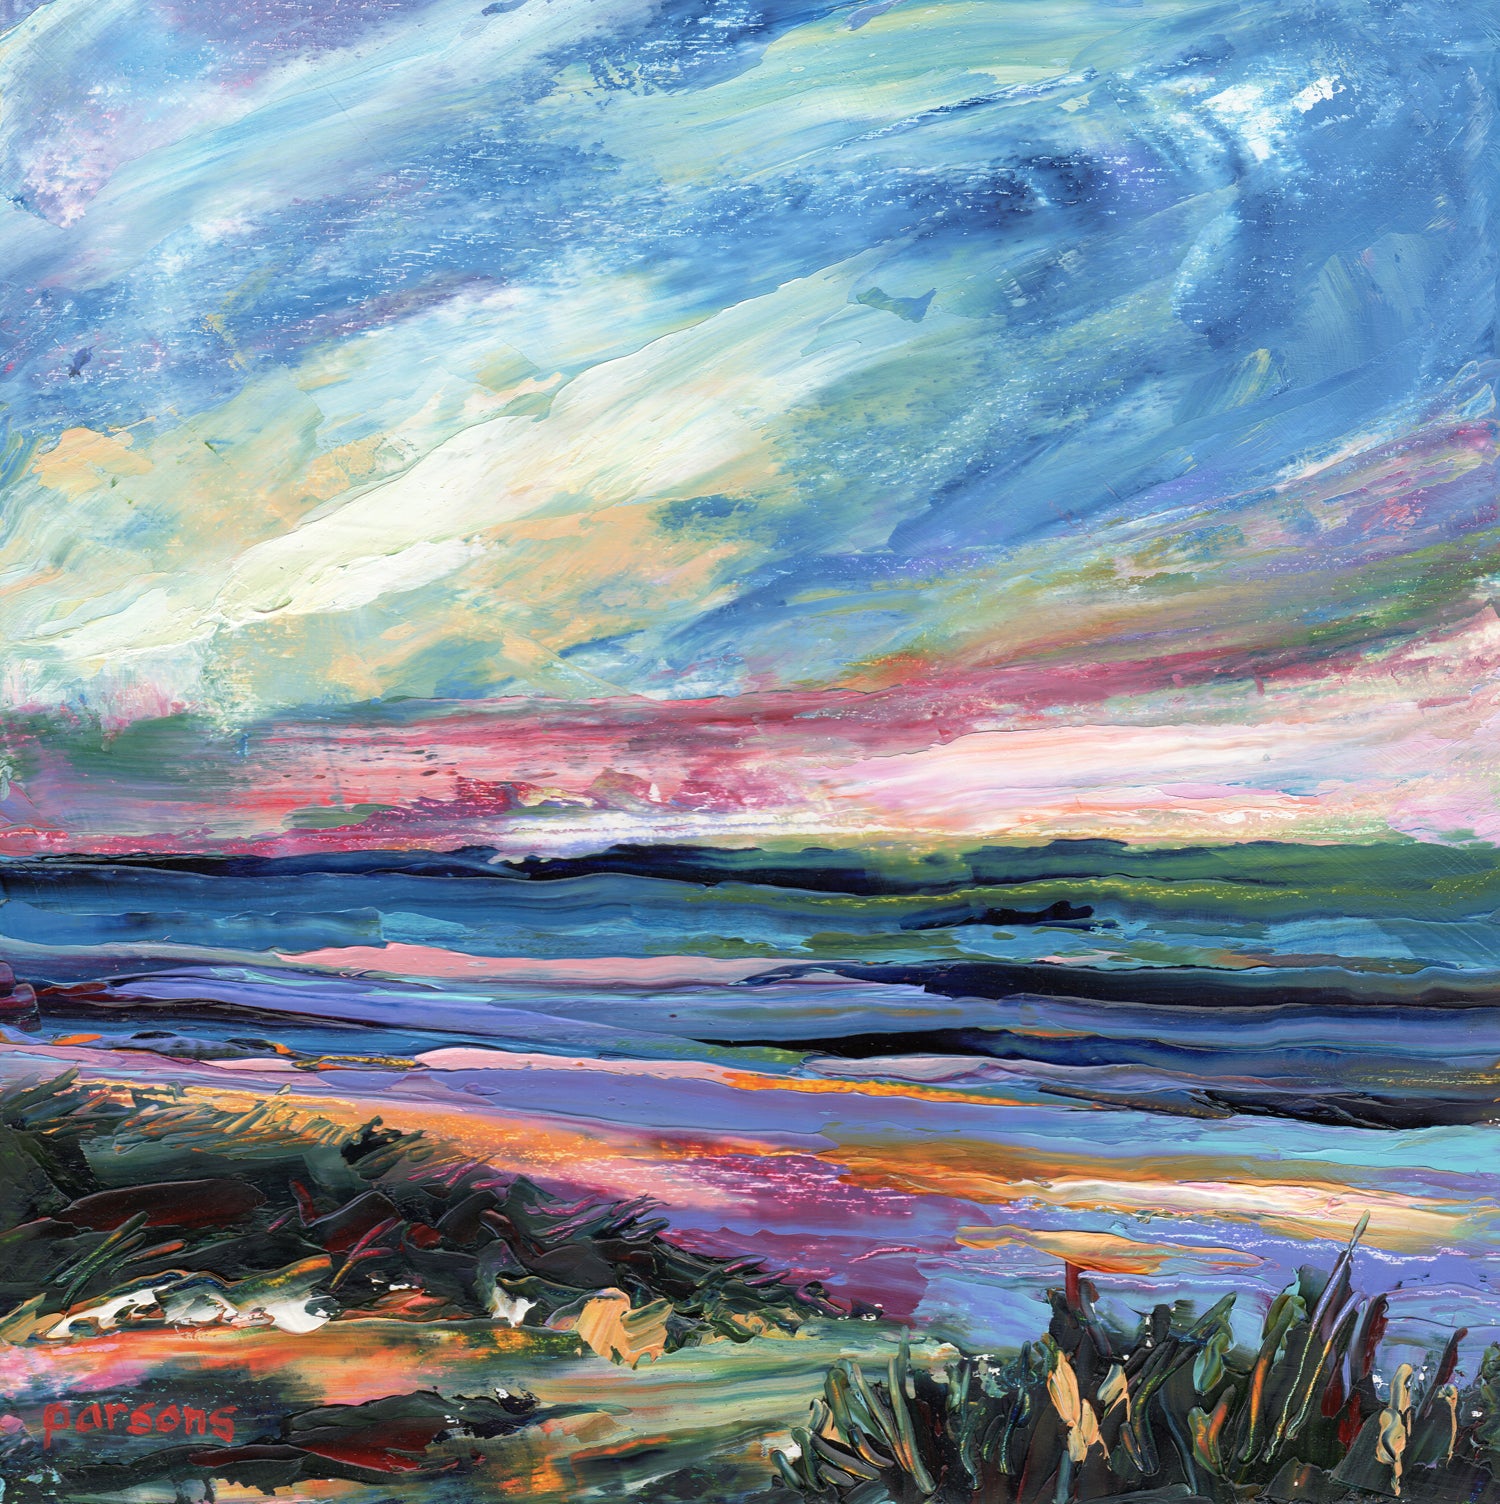 Sunset, Jersey Shore. Original oil on panel painting. By Pamela Parsons